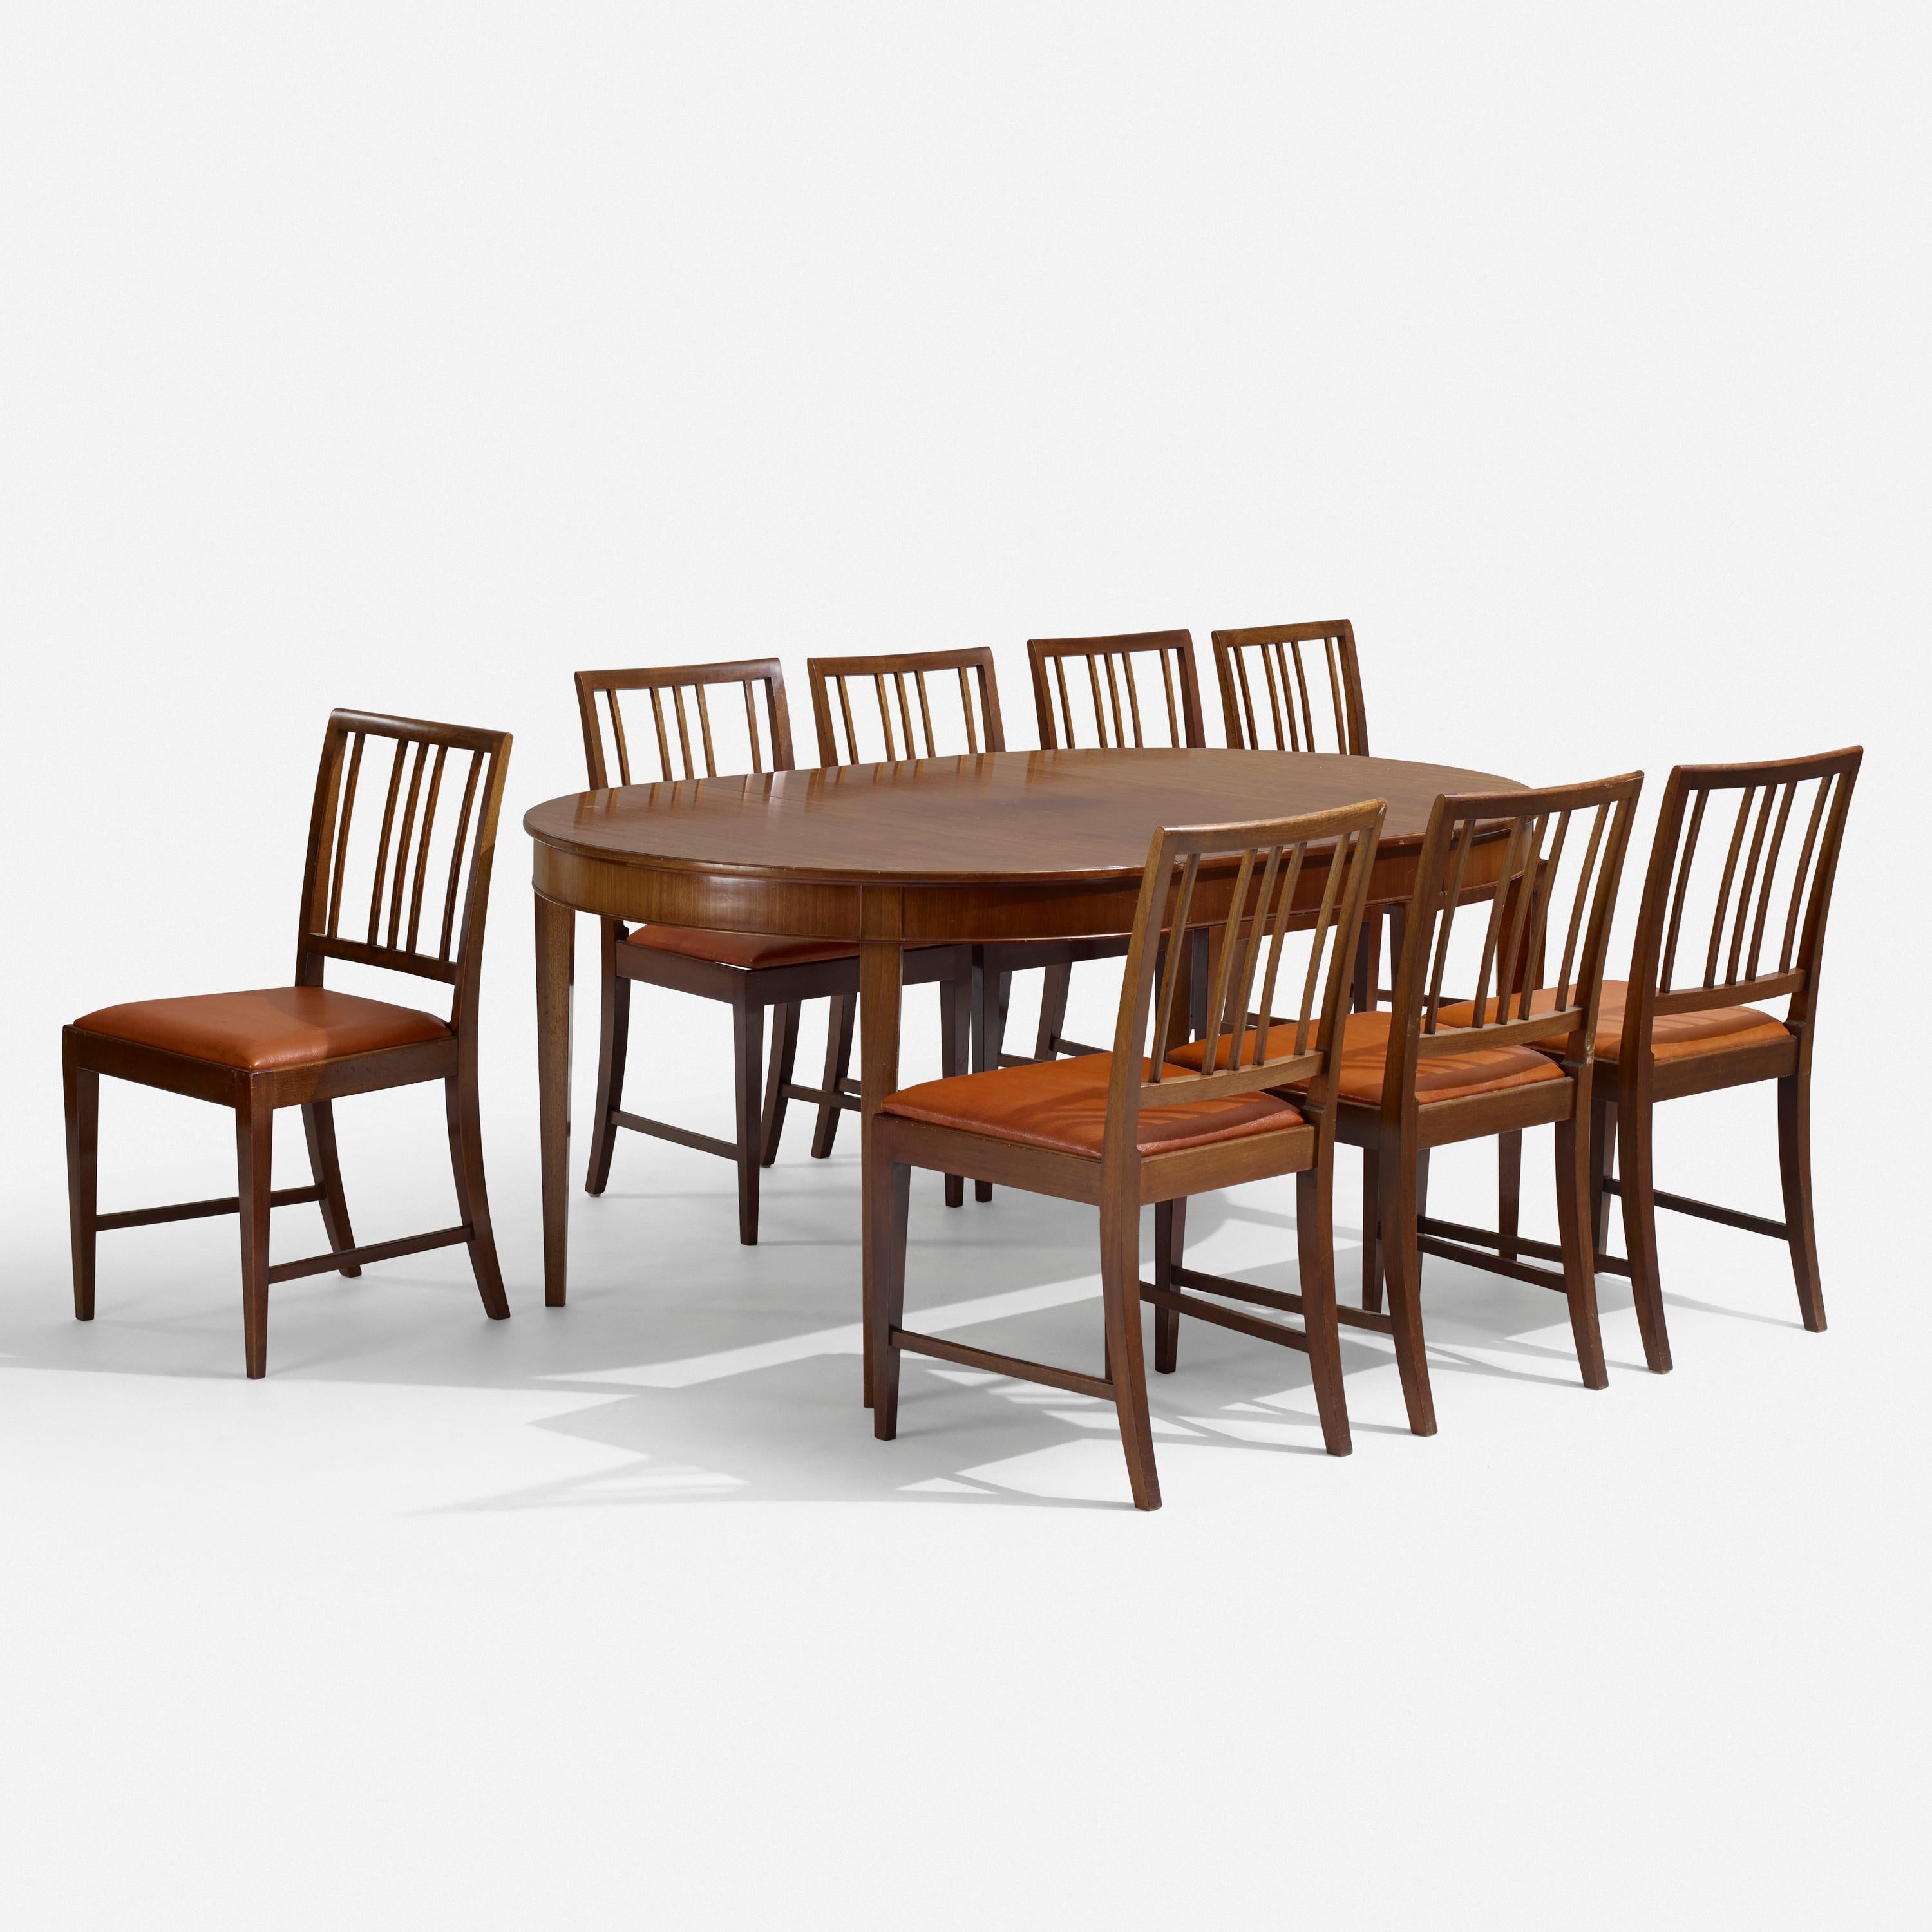 Mid-20th Century Frits Henningsen Danish Modern Dining Chairs, circa 1930s For Sale